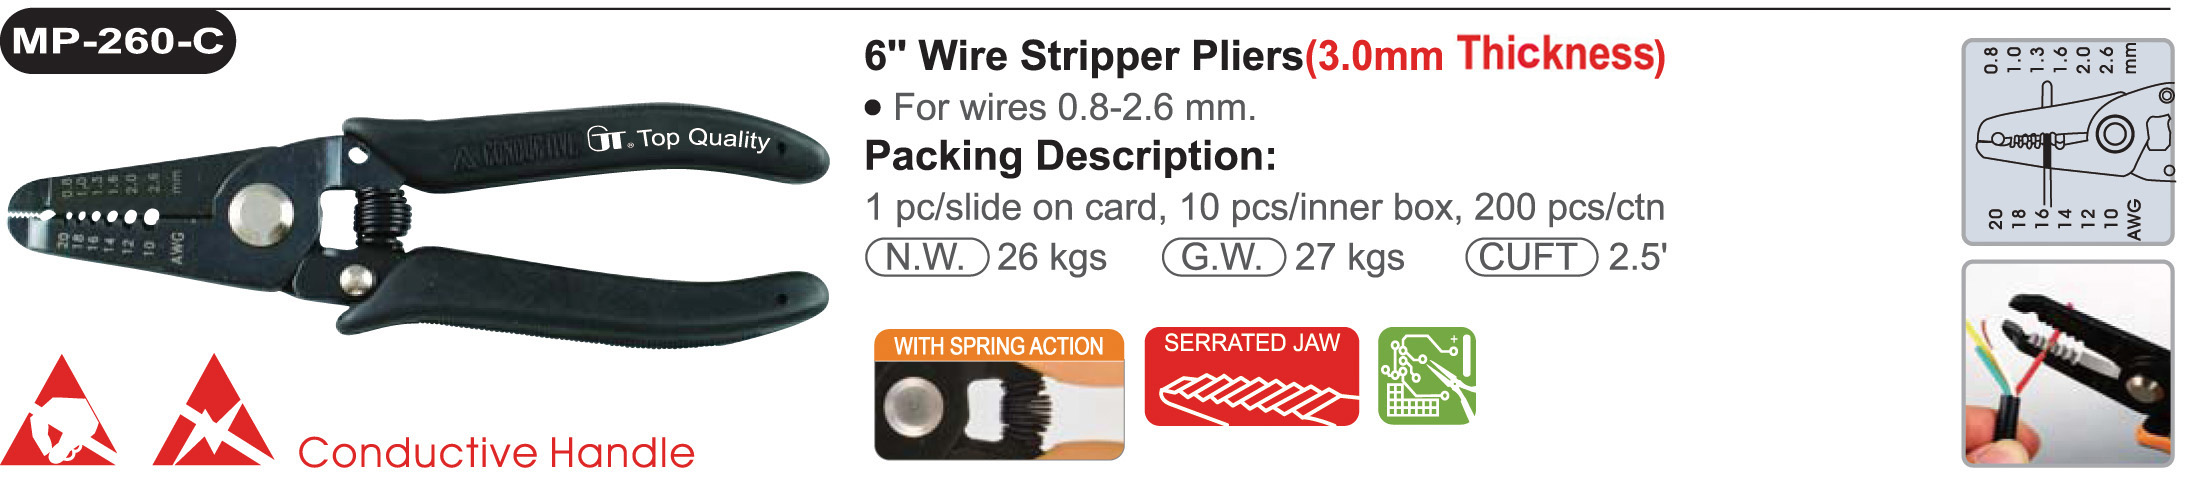 proimages/product/pliers/wire_strippers/ELECTRONICS_WIRE_STRIPPER_ESD/MP-260C/MP-260-C.jpg